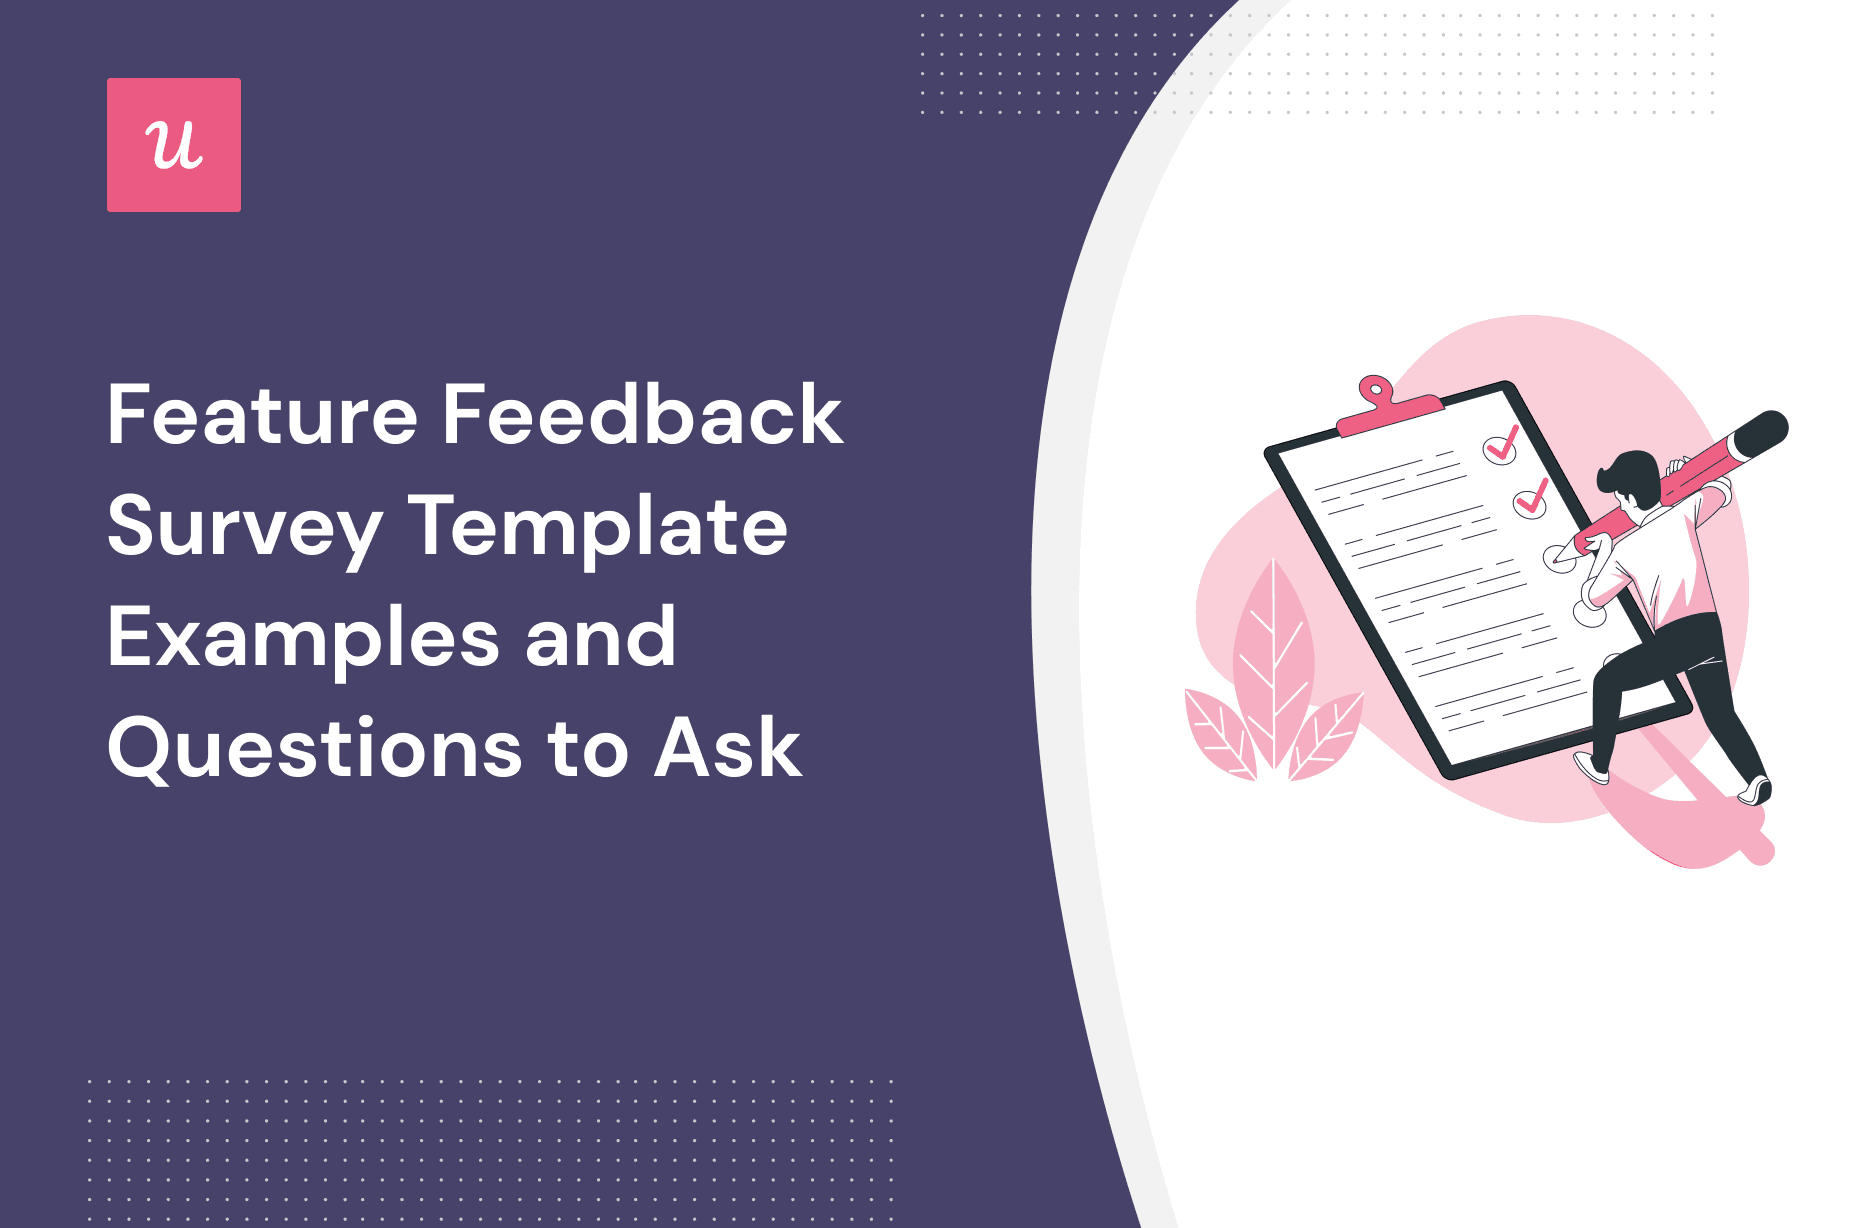 Feature Feedback Survey Template: Examples and Questions to Ask cover